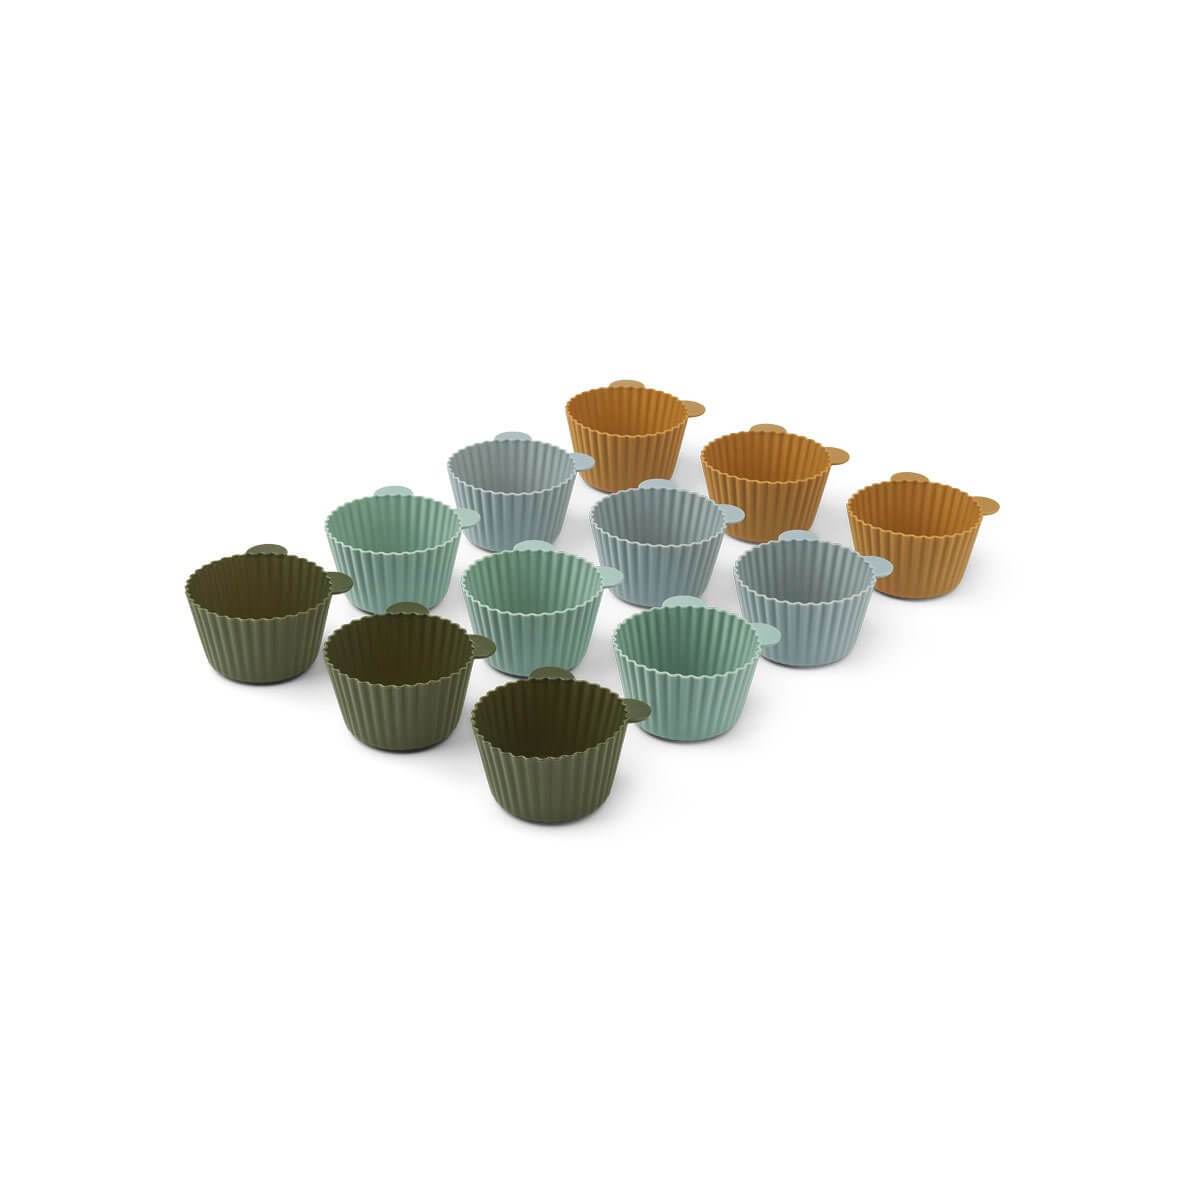 Liewood Jerry Cake Cup (12 pack) in Green Multi Mix - Scandibørn